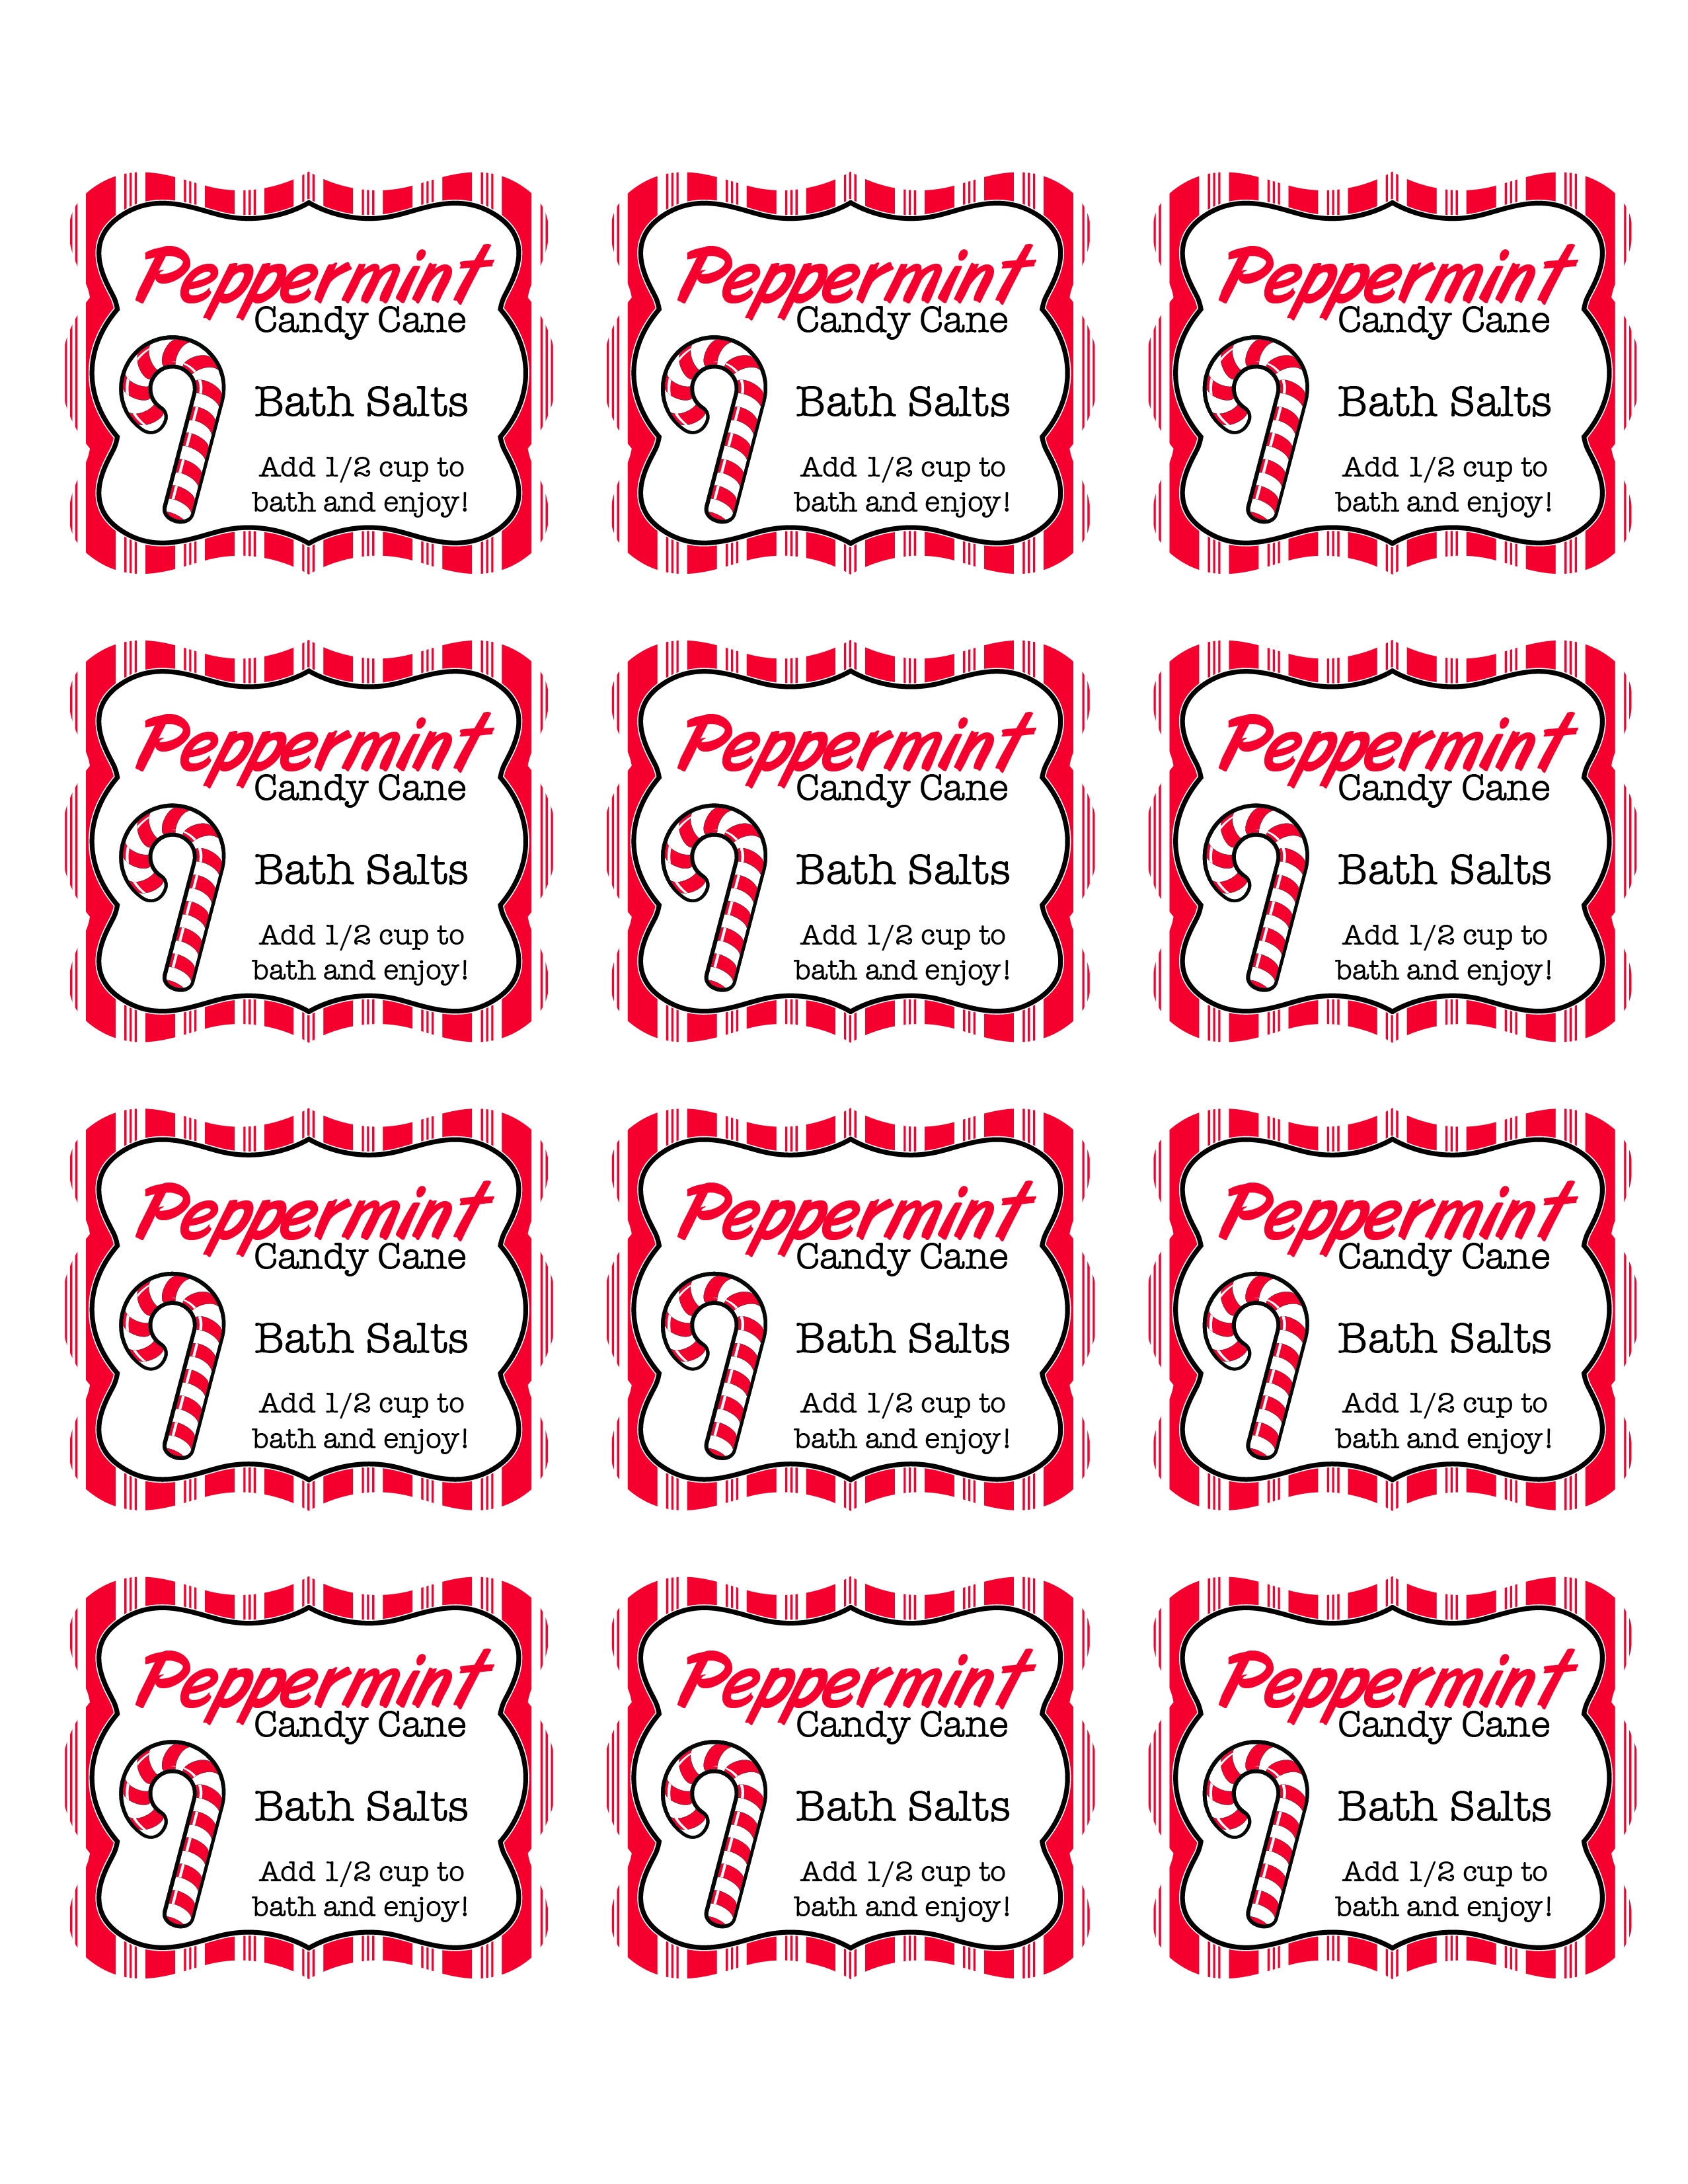 The 21 Best Ideas for Christmas Candy Gram Template Best Recipes Ever